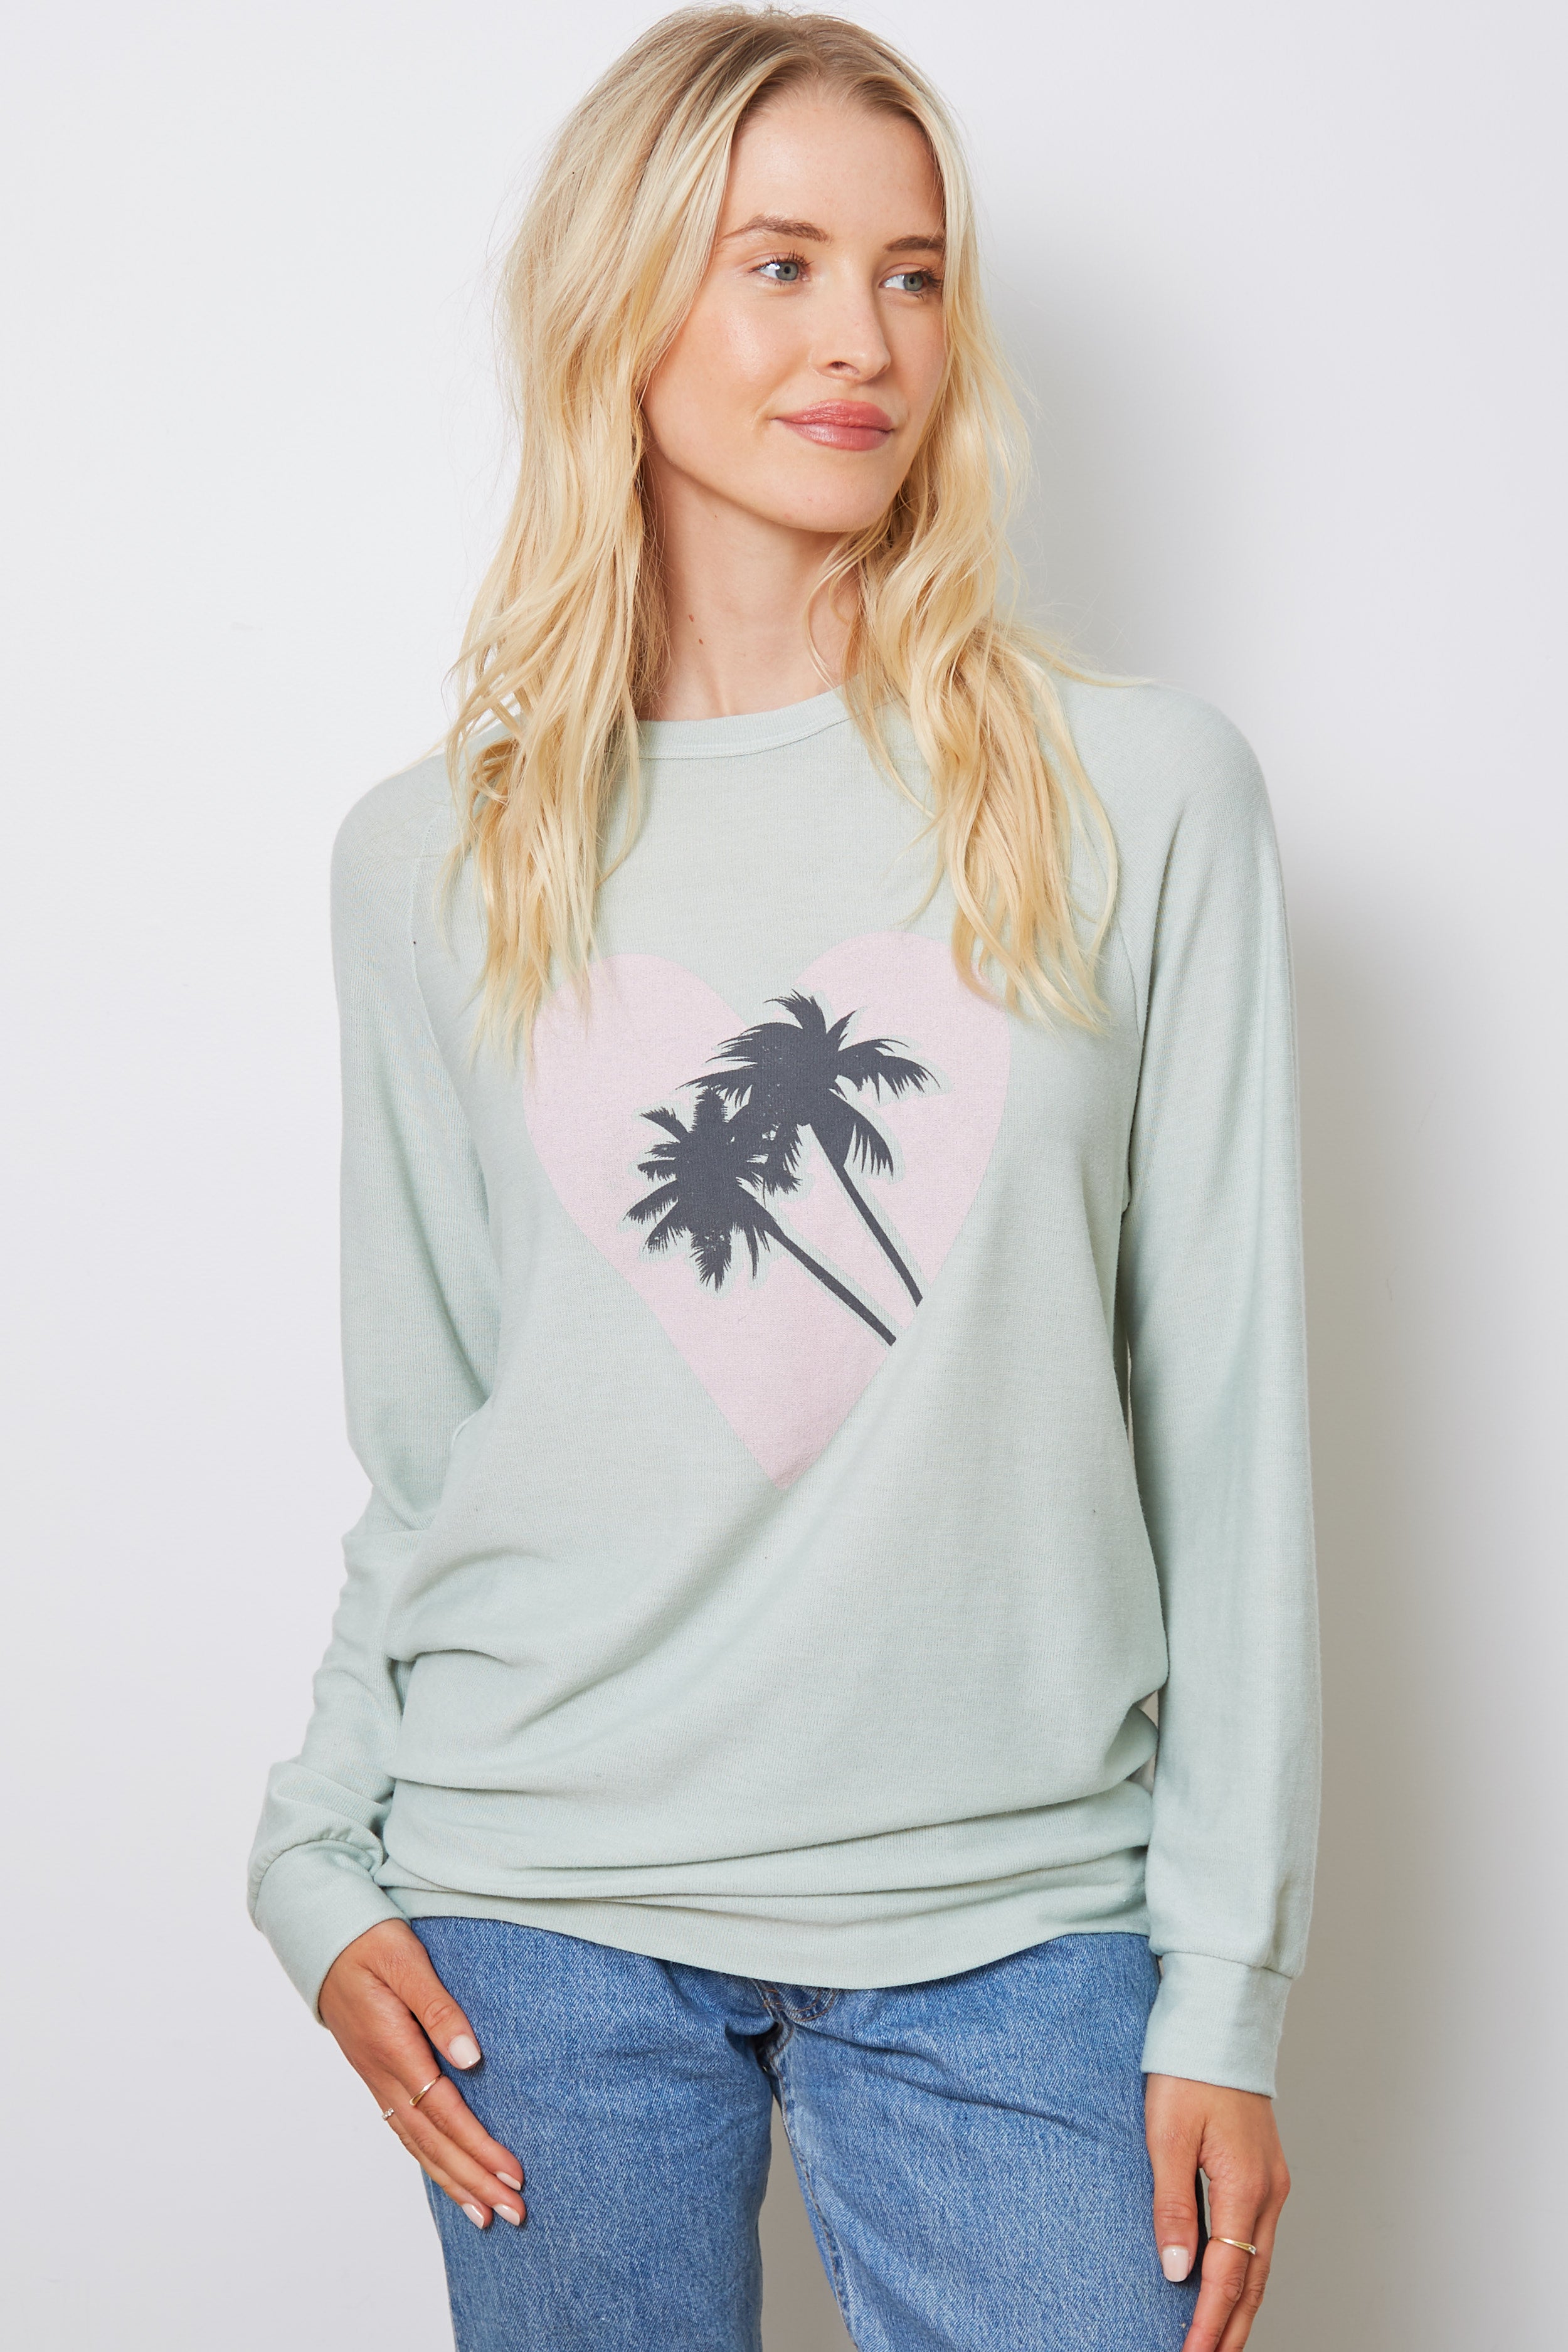 Good hYOUman Palm Heart Sweater - Pistachio Clothing - Tops - Shirts - LS Knits by Good hYOUman | Grace the Boutique